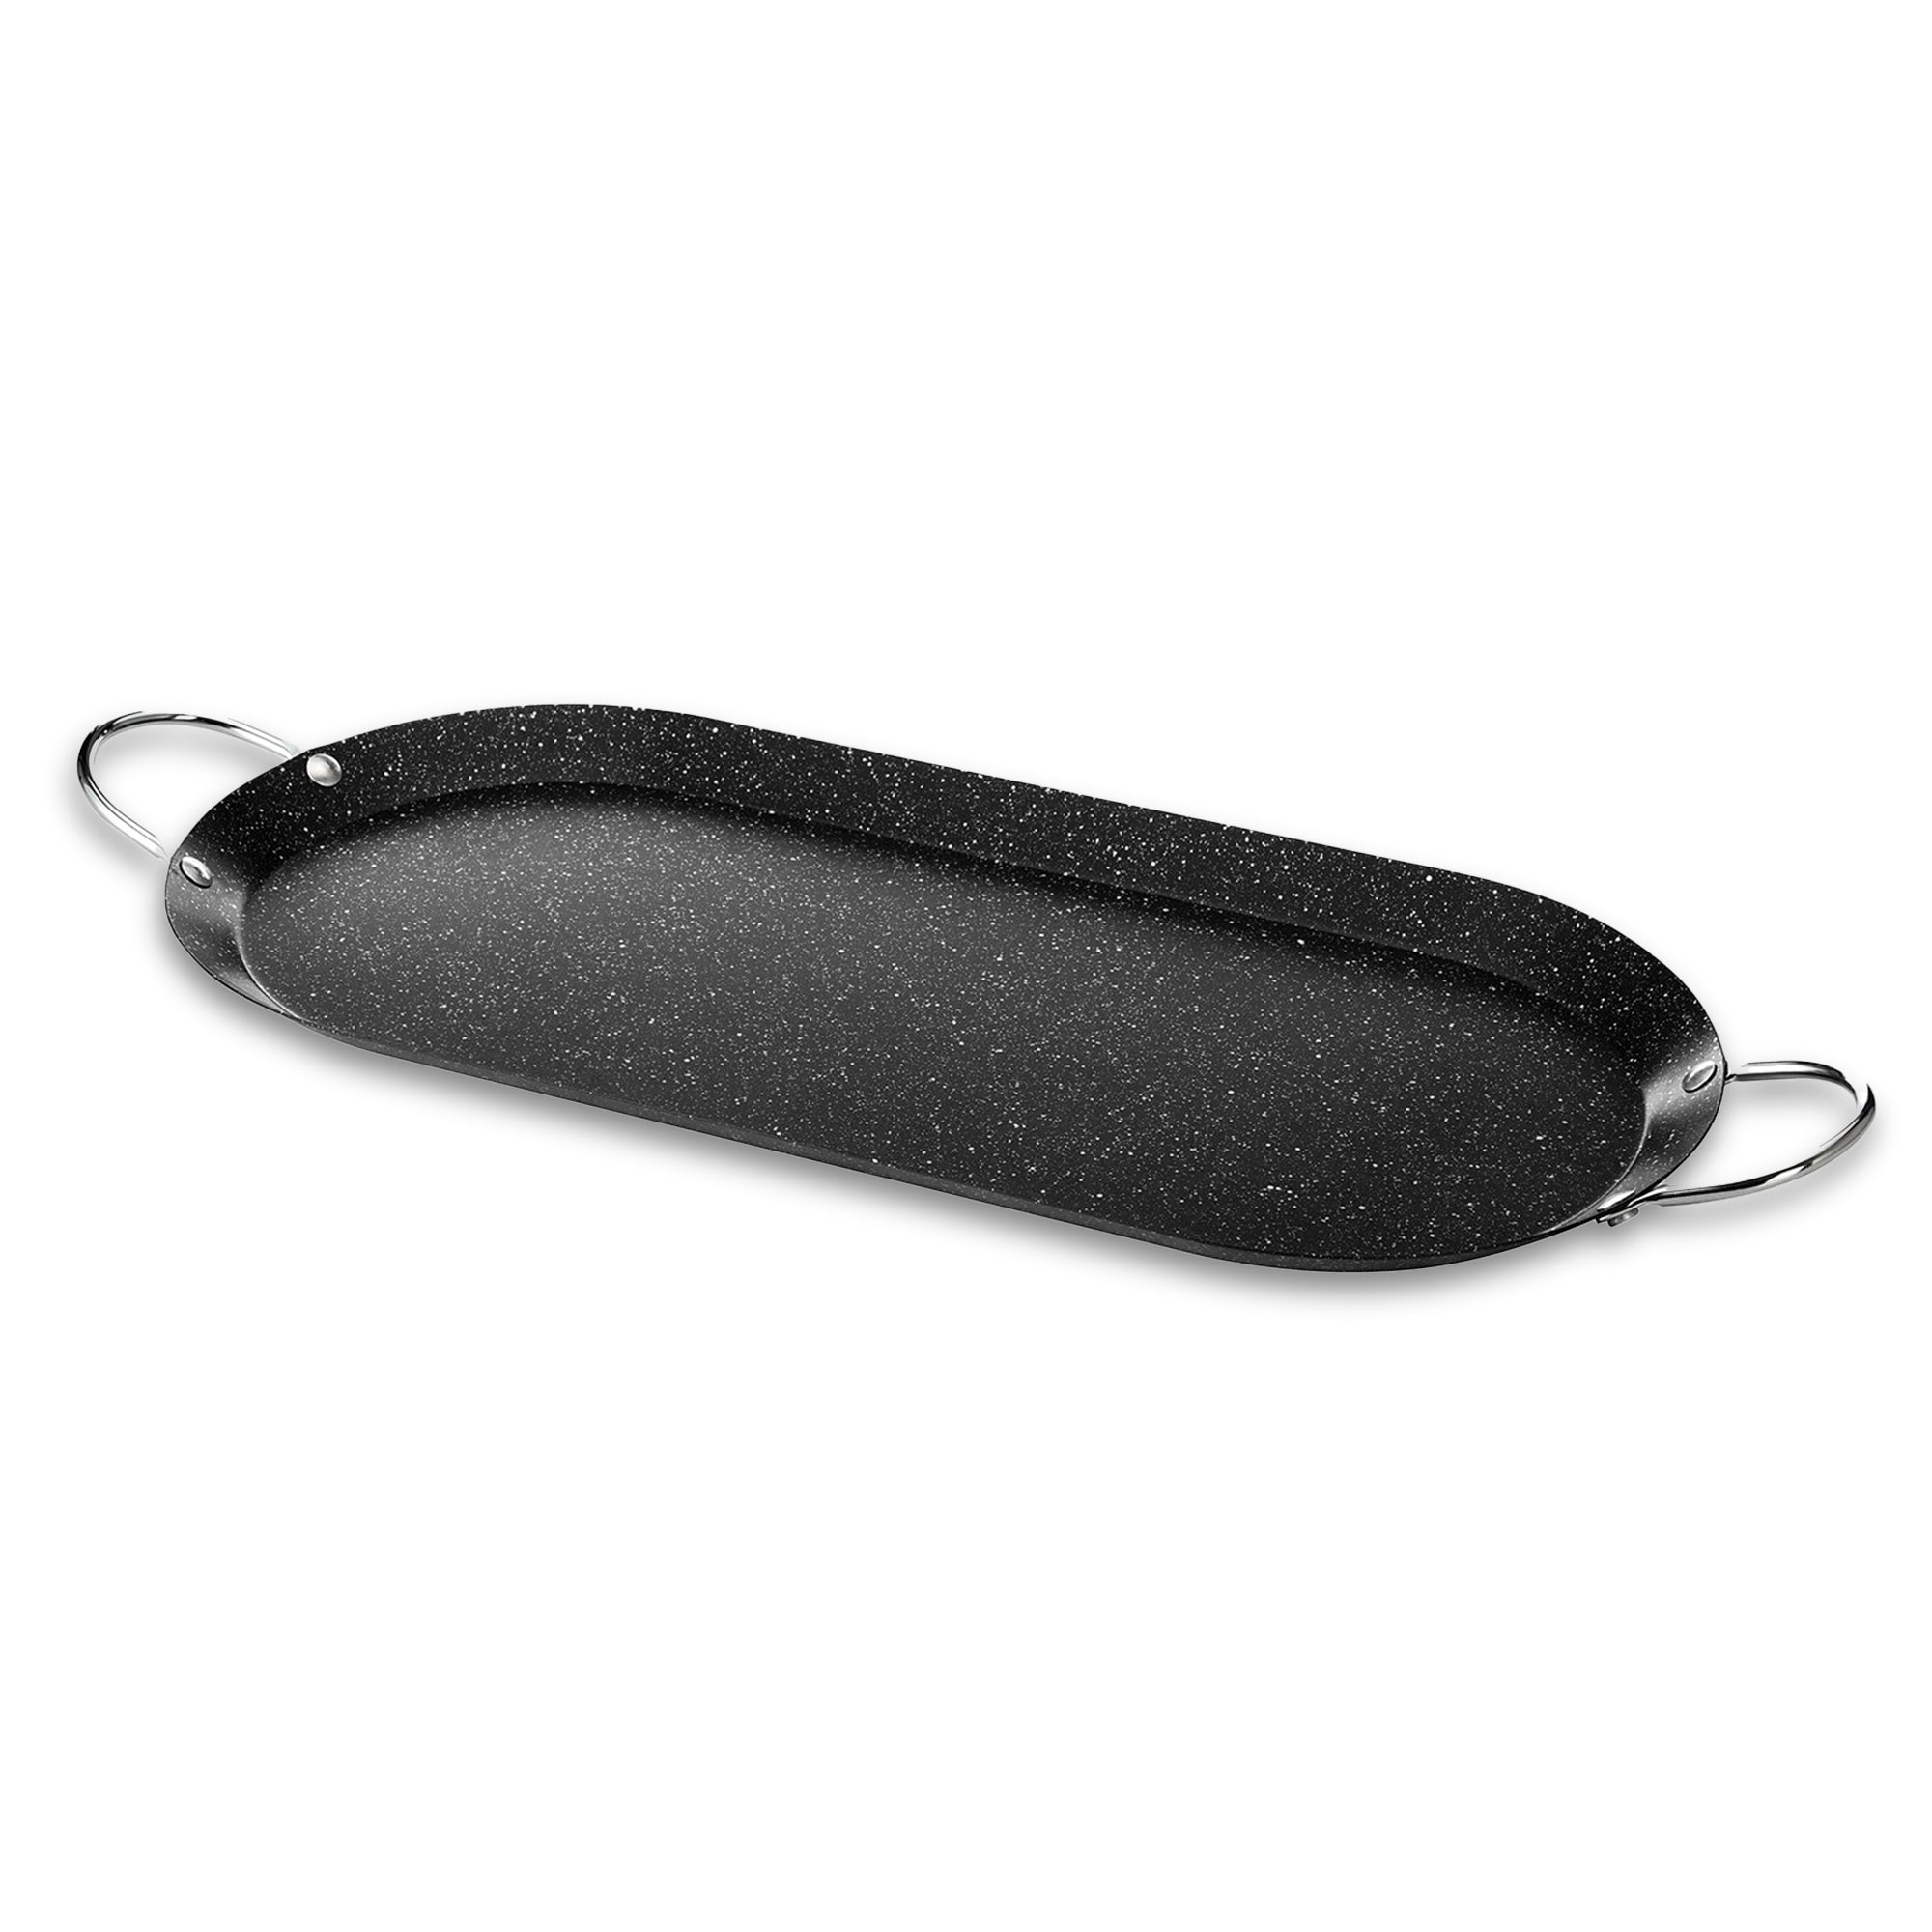 Alpine Cuisine Nonstick Oval Comal 17.5x8-Inch - Black Carbon Steel Tortilla  Comal with Single Handle - Durable, Heavy Duty Comal for Cooking -  Even-Heating & Long Lasting - Versatile Kitchen Cookware 